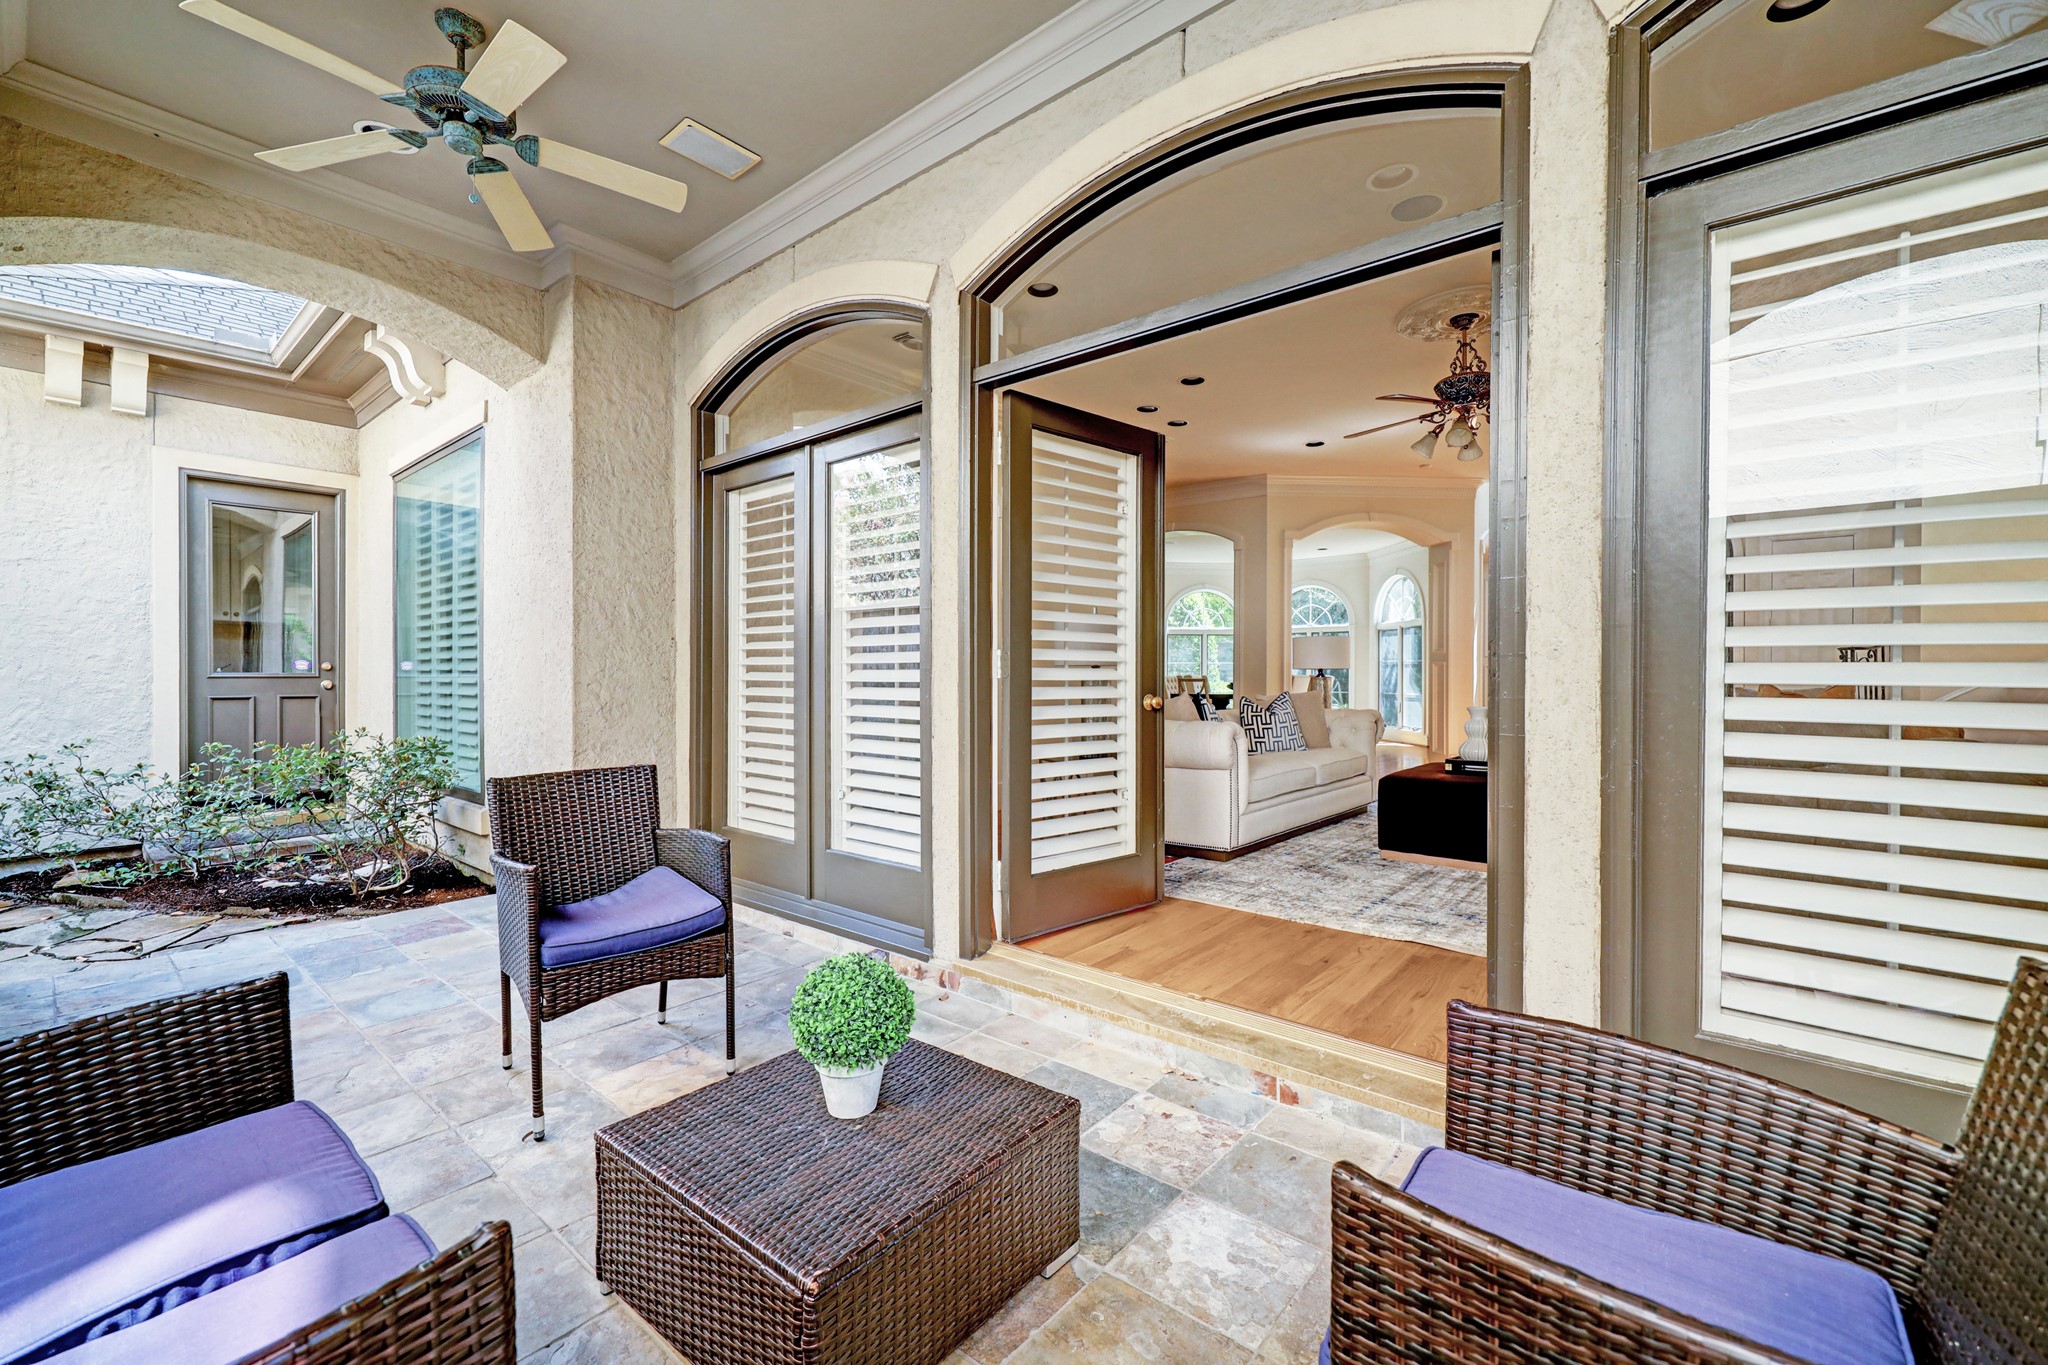 French doors from the living area lead out to this comfortable lighted covered patio w/ ceiling fans and sound speakers.  It is perfect for those cool nights to come when you can sit out and enjoy a beverage and conversation.  Have your friends over.